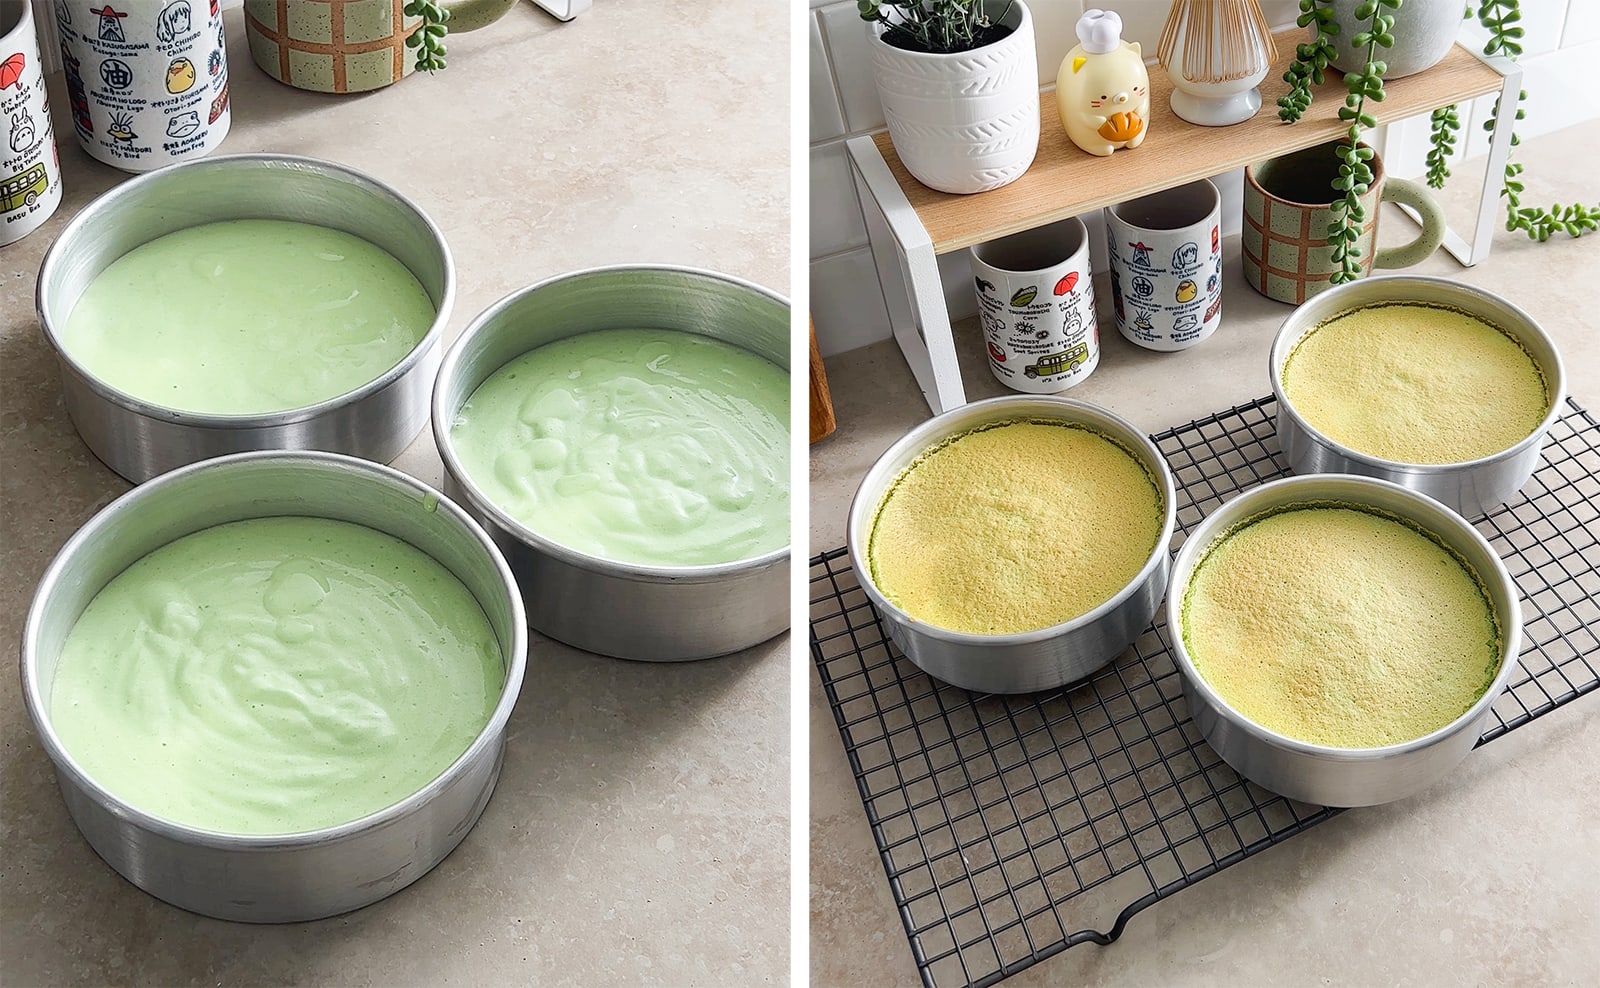 Left to right: pandan cake batter in three cake pans, three cakes on wire rack after baking.